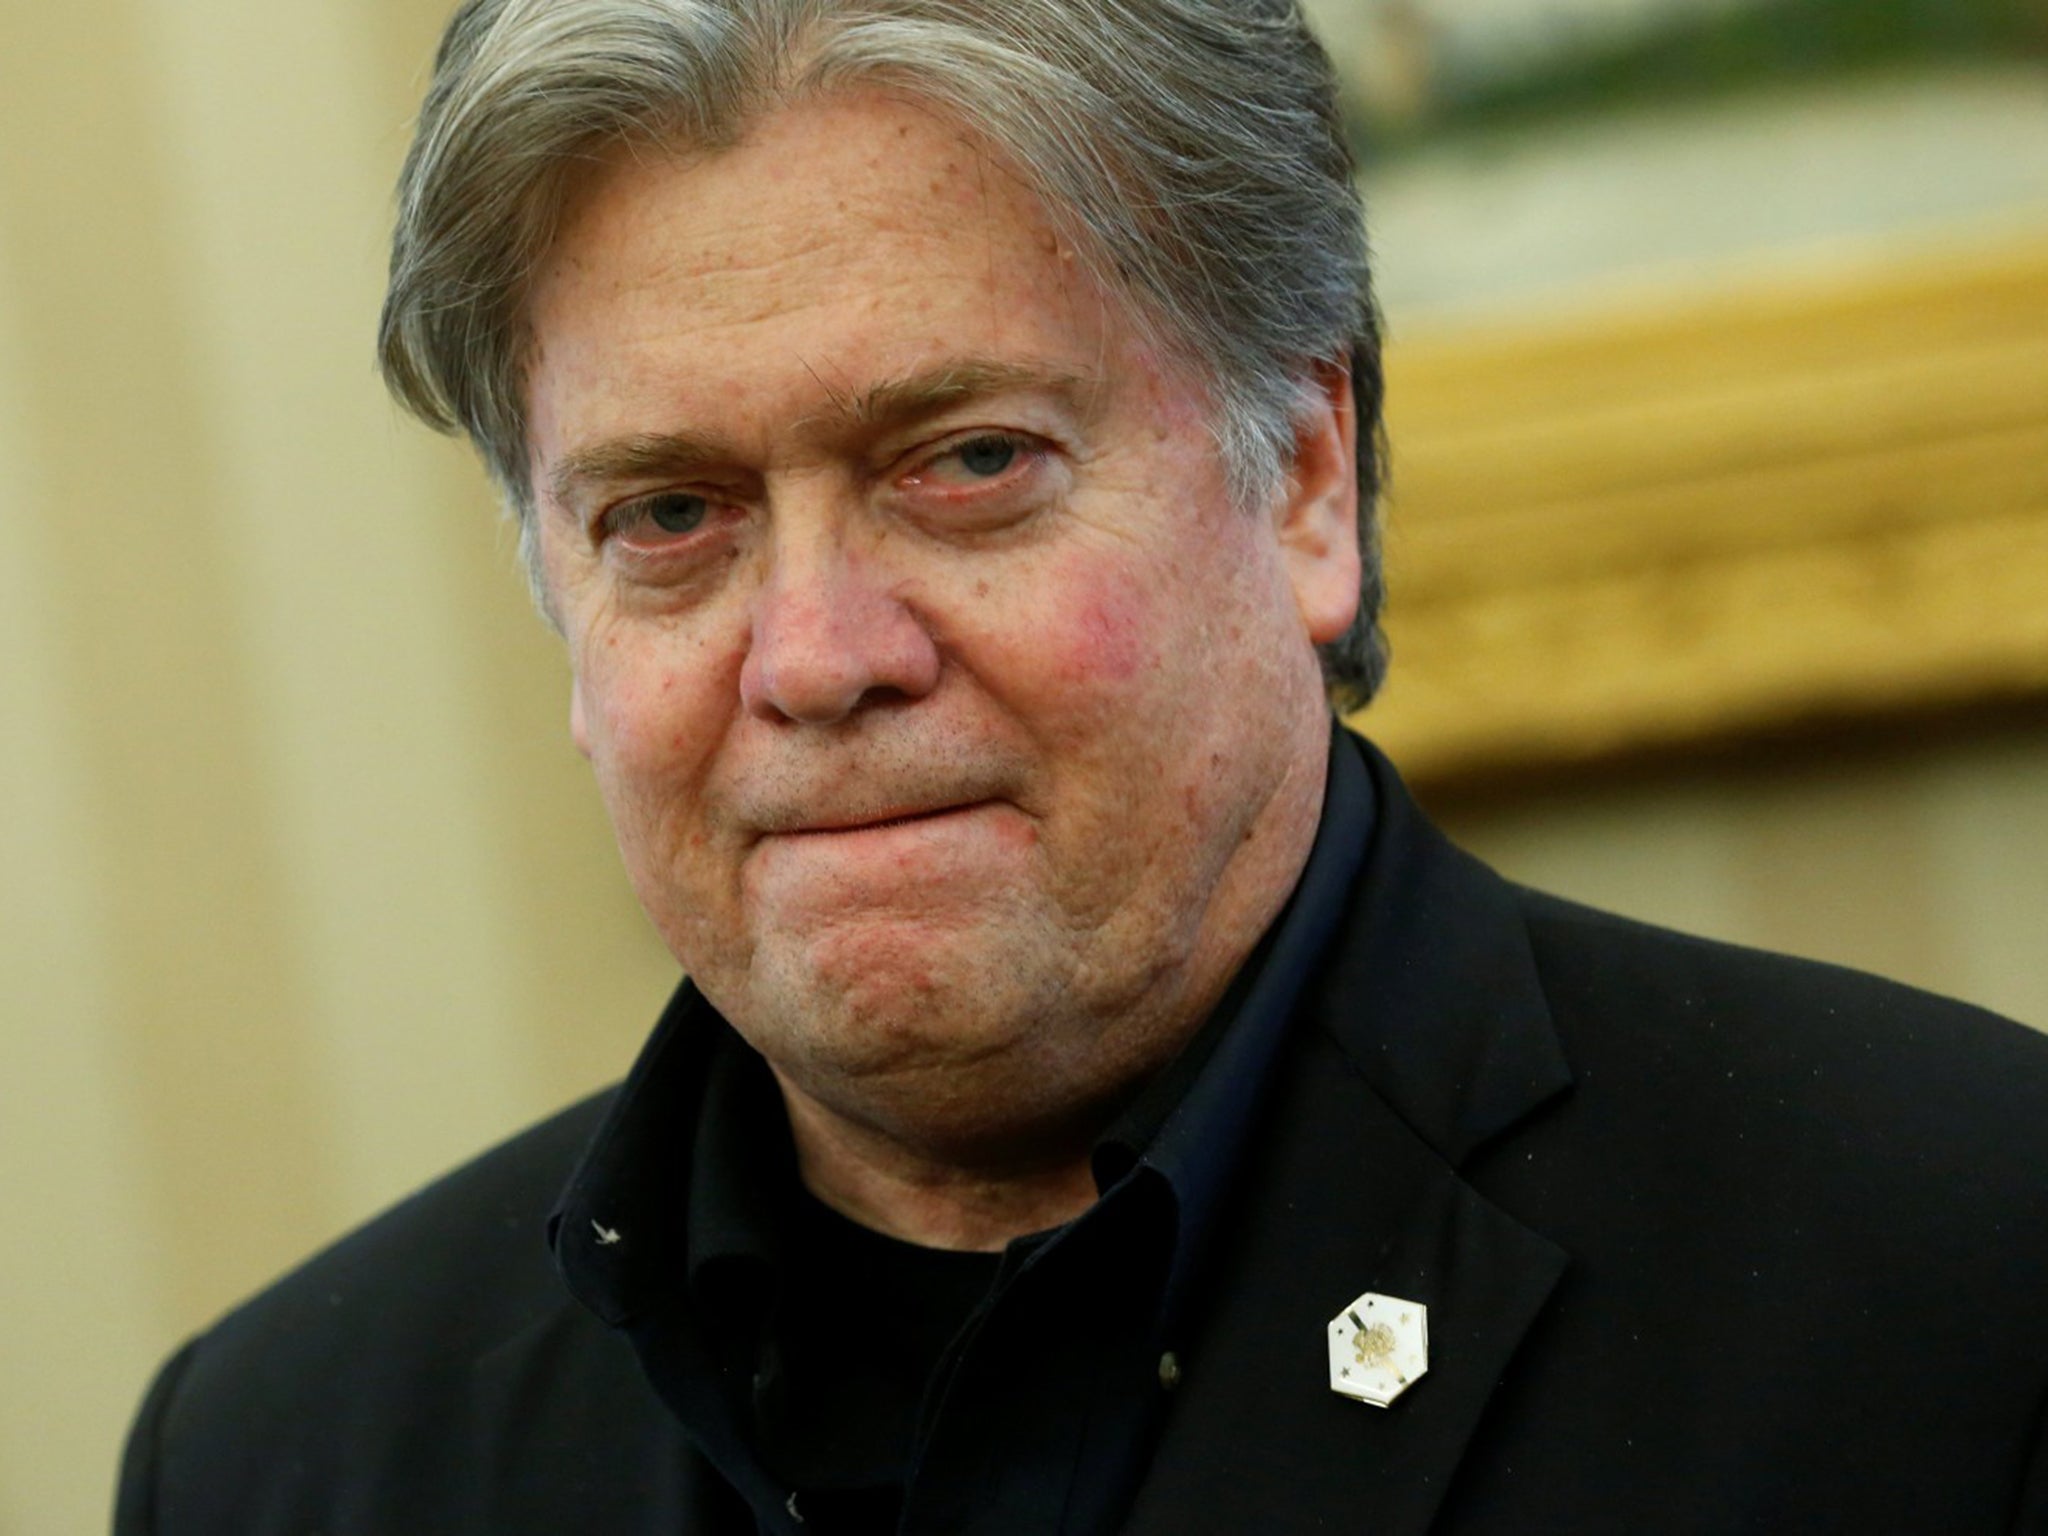 As nationwide protests against President Trump’s immigration mandate rage on, he reshuffled the National Security Council and put chief strategist and former Breitbart News chair Stephen Bannon in an unprecedented national security role